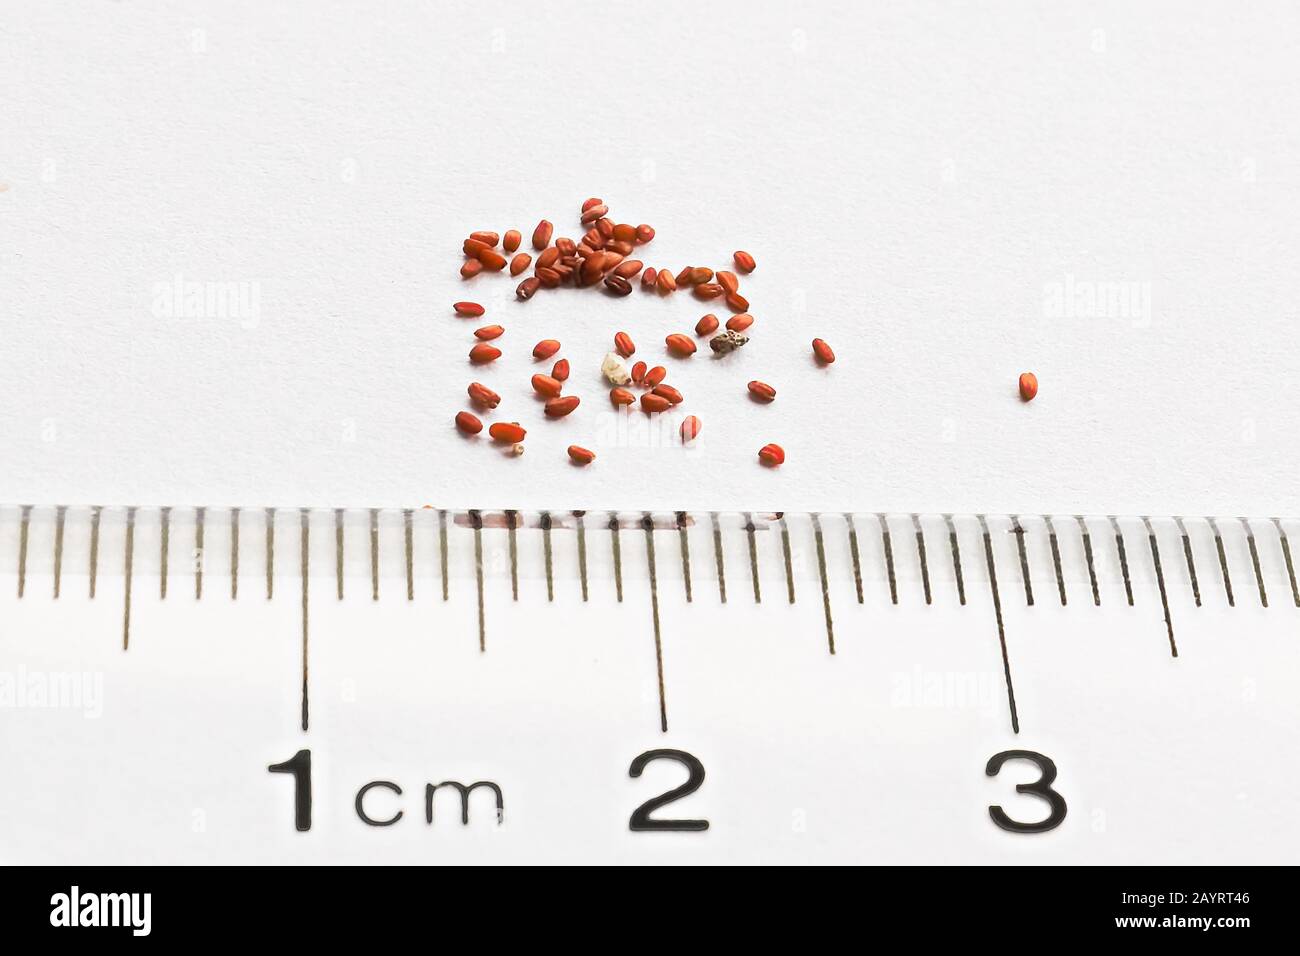 Tiny brown lithops seeds against a ruler Stock Photo